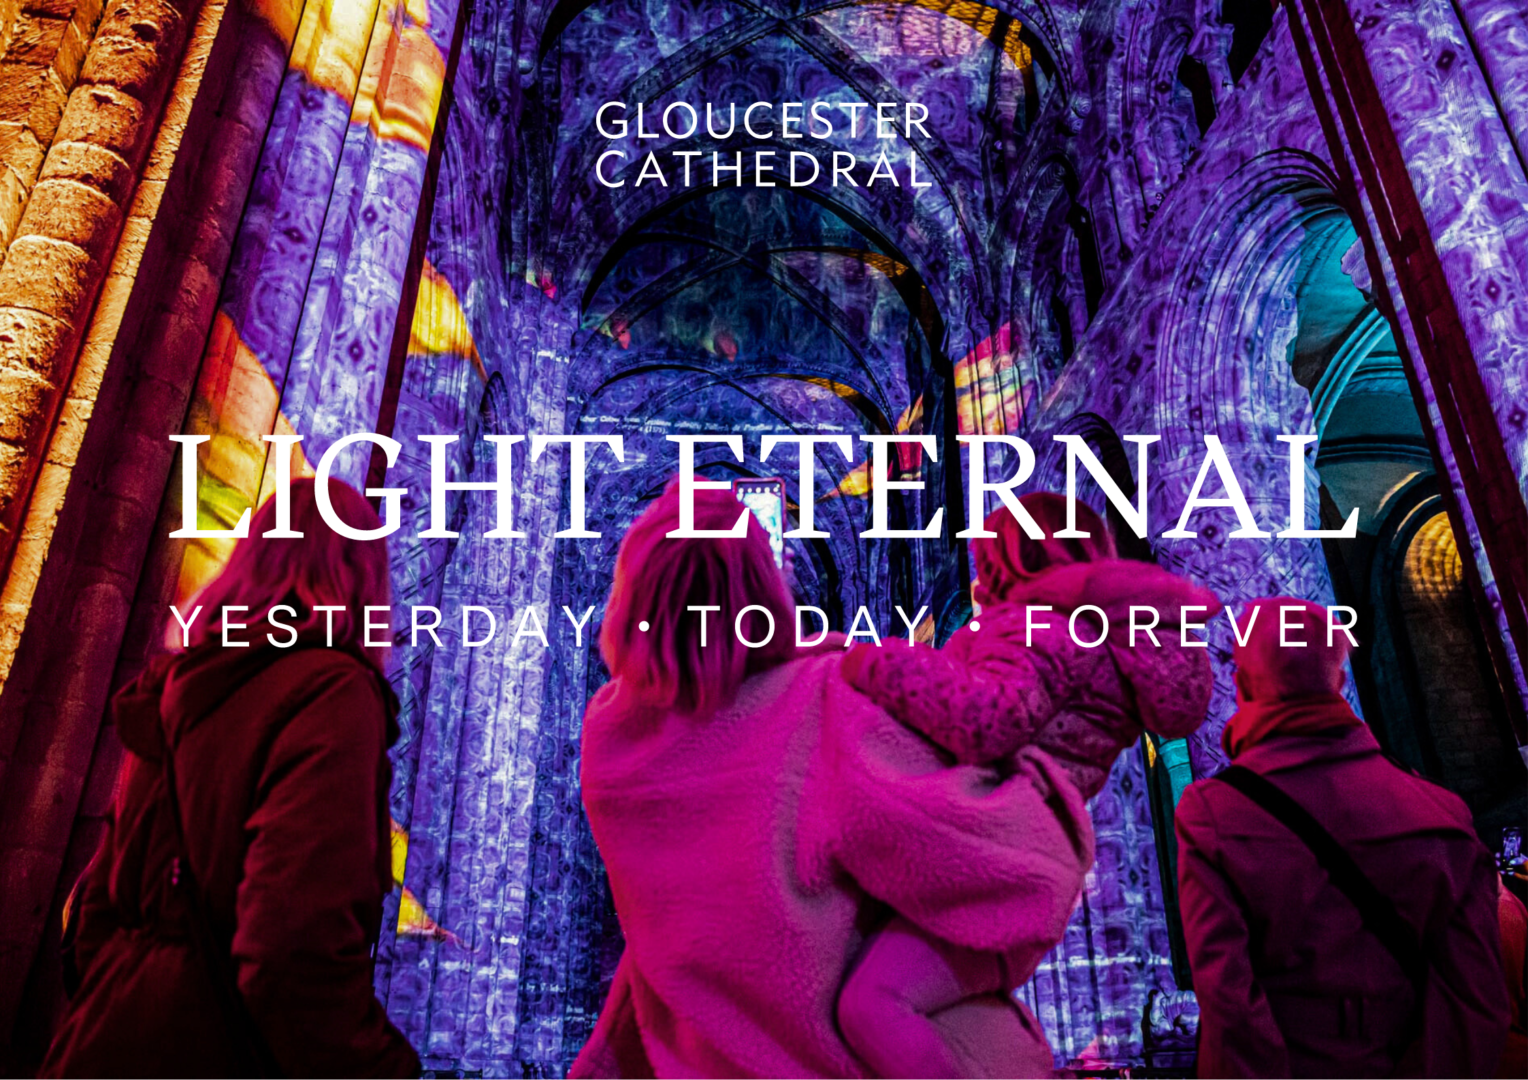 Light Eternal is coming to Gloucester Cathedral - created by Luxmuralis